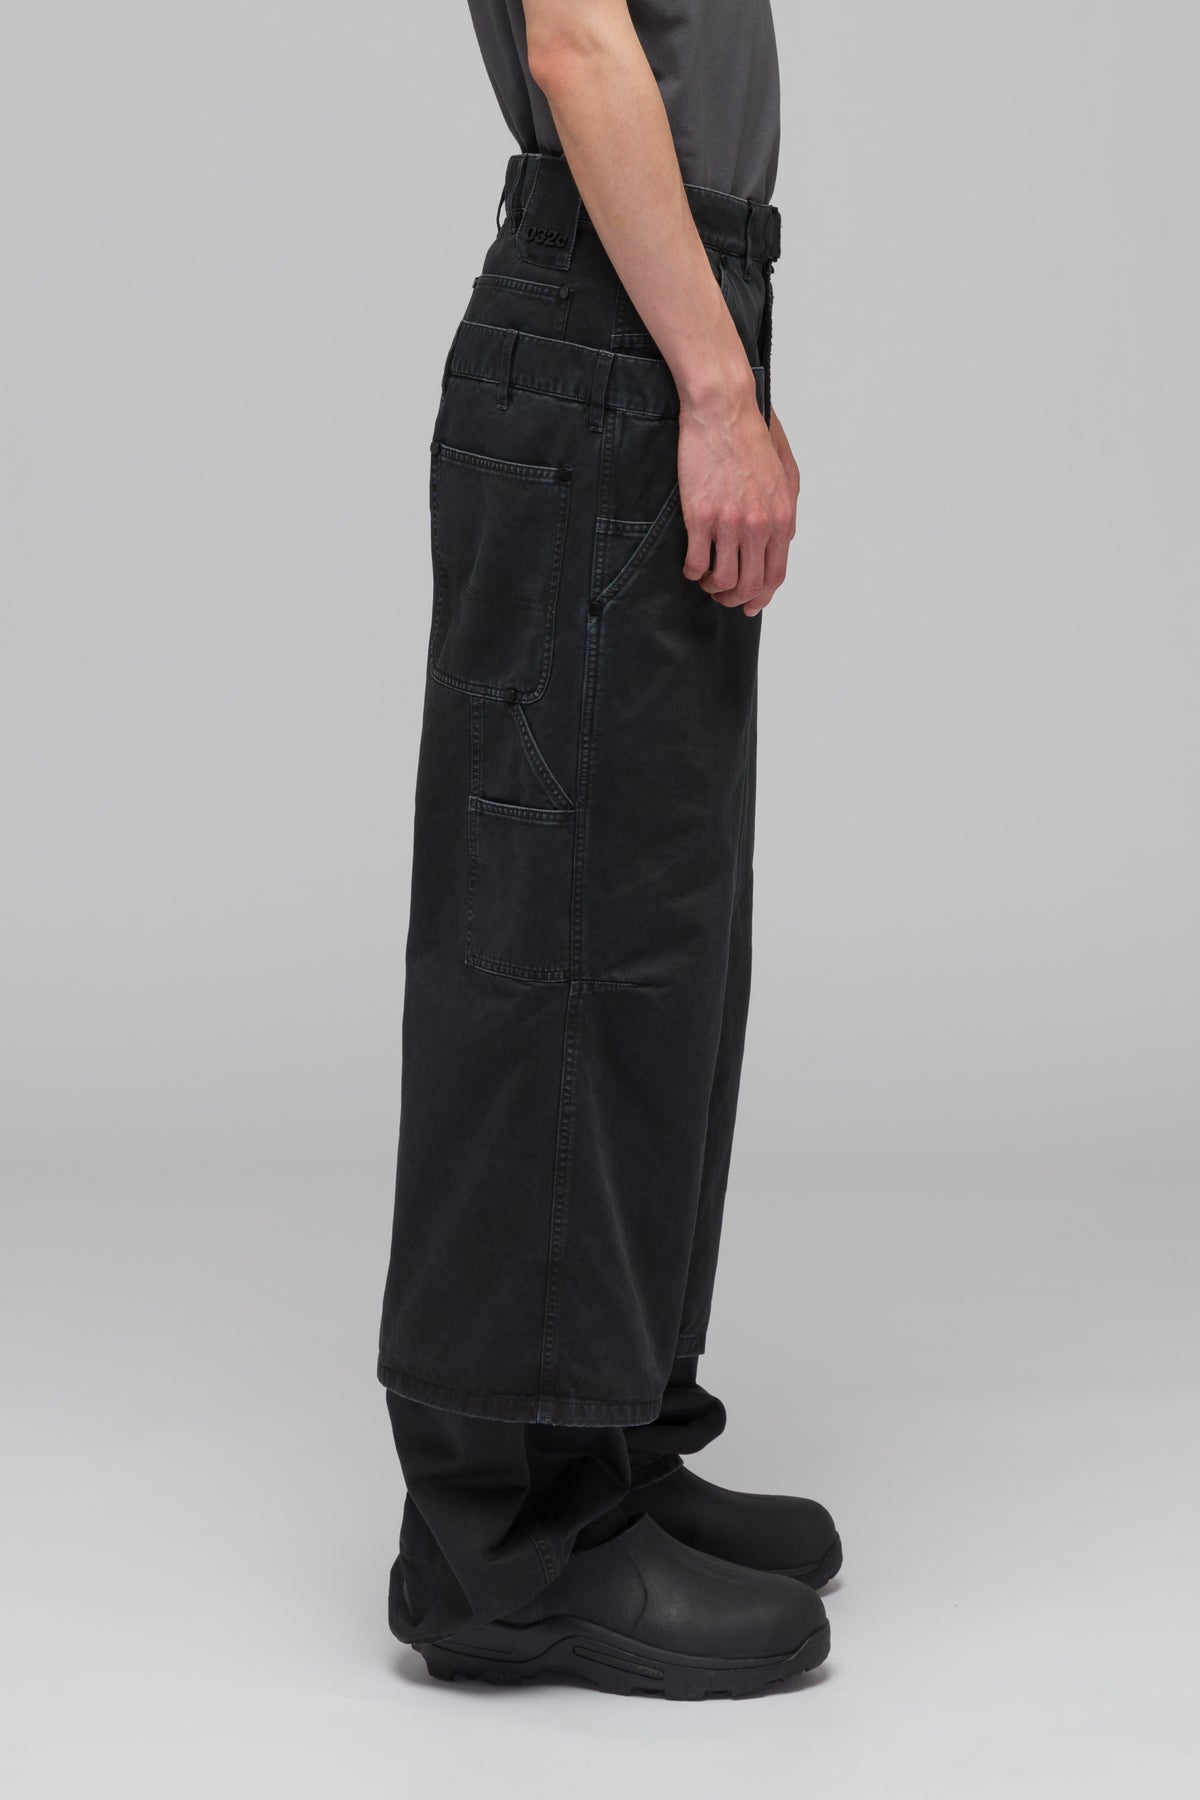 'DOUBLE SHIFT' UTILITY TROUSERS